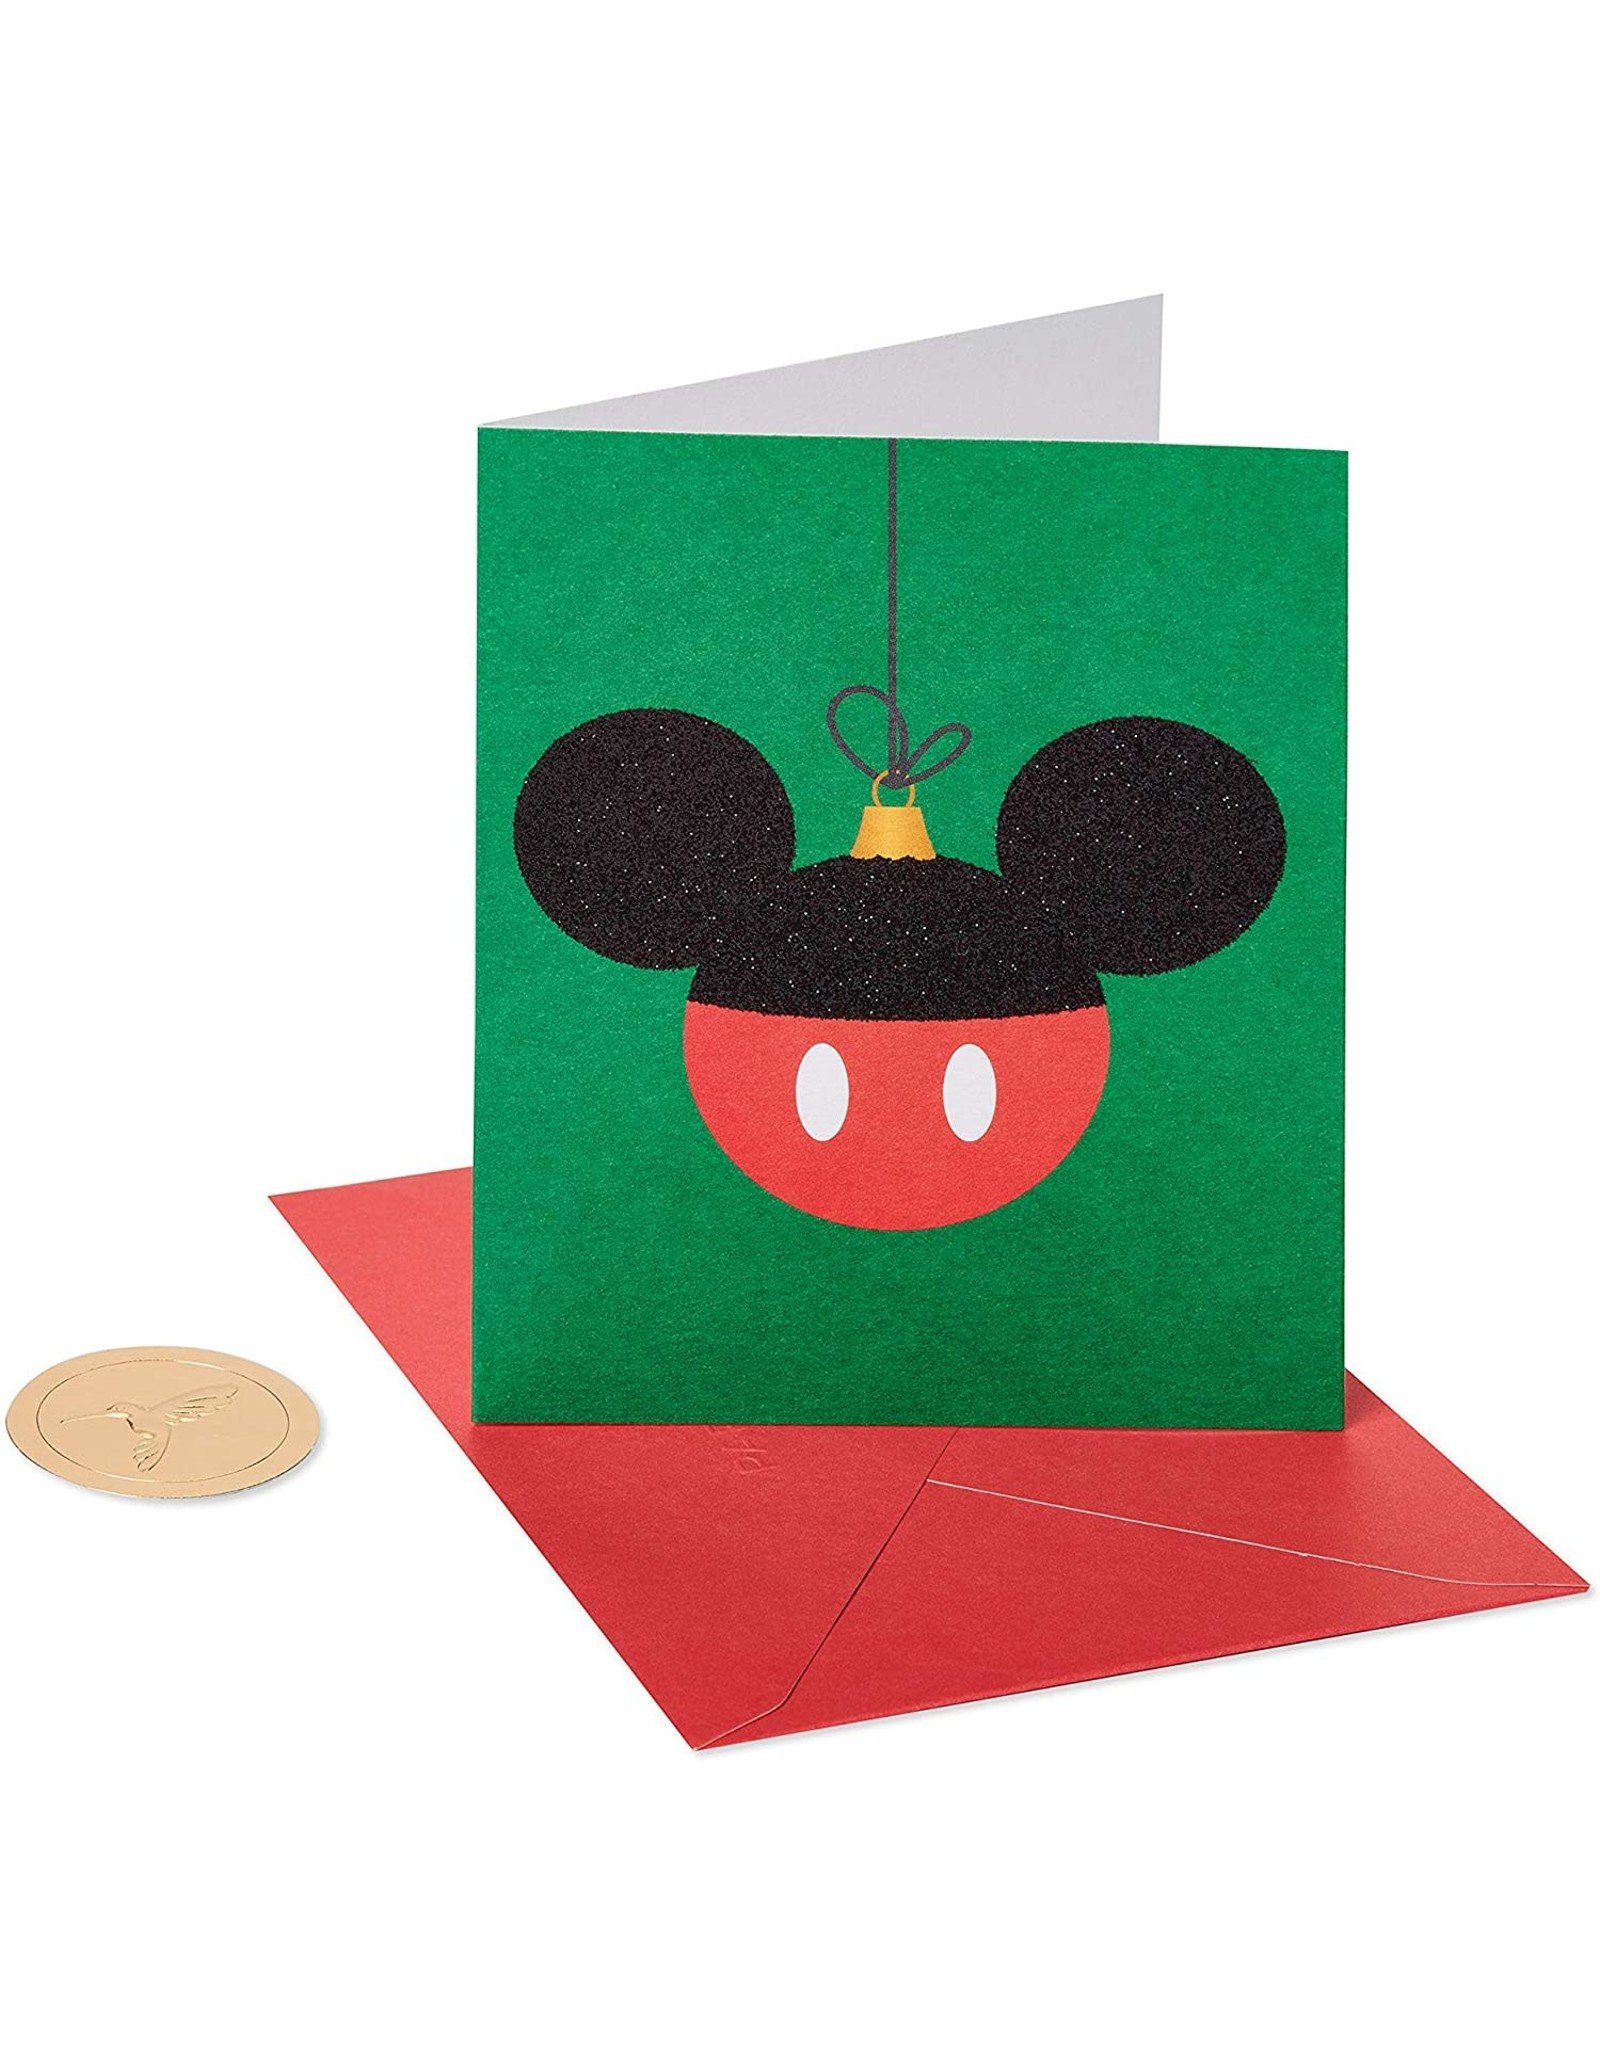 PAPYRUS® Boxed Christmas Cards 20pk Mickey Mouse Ornament